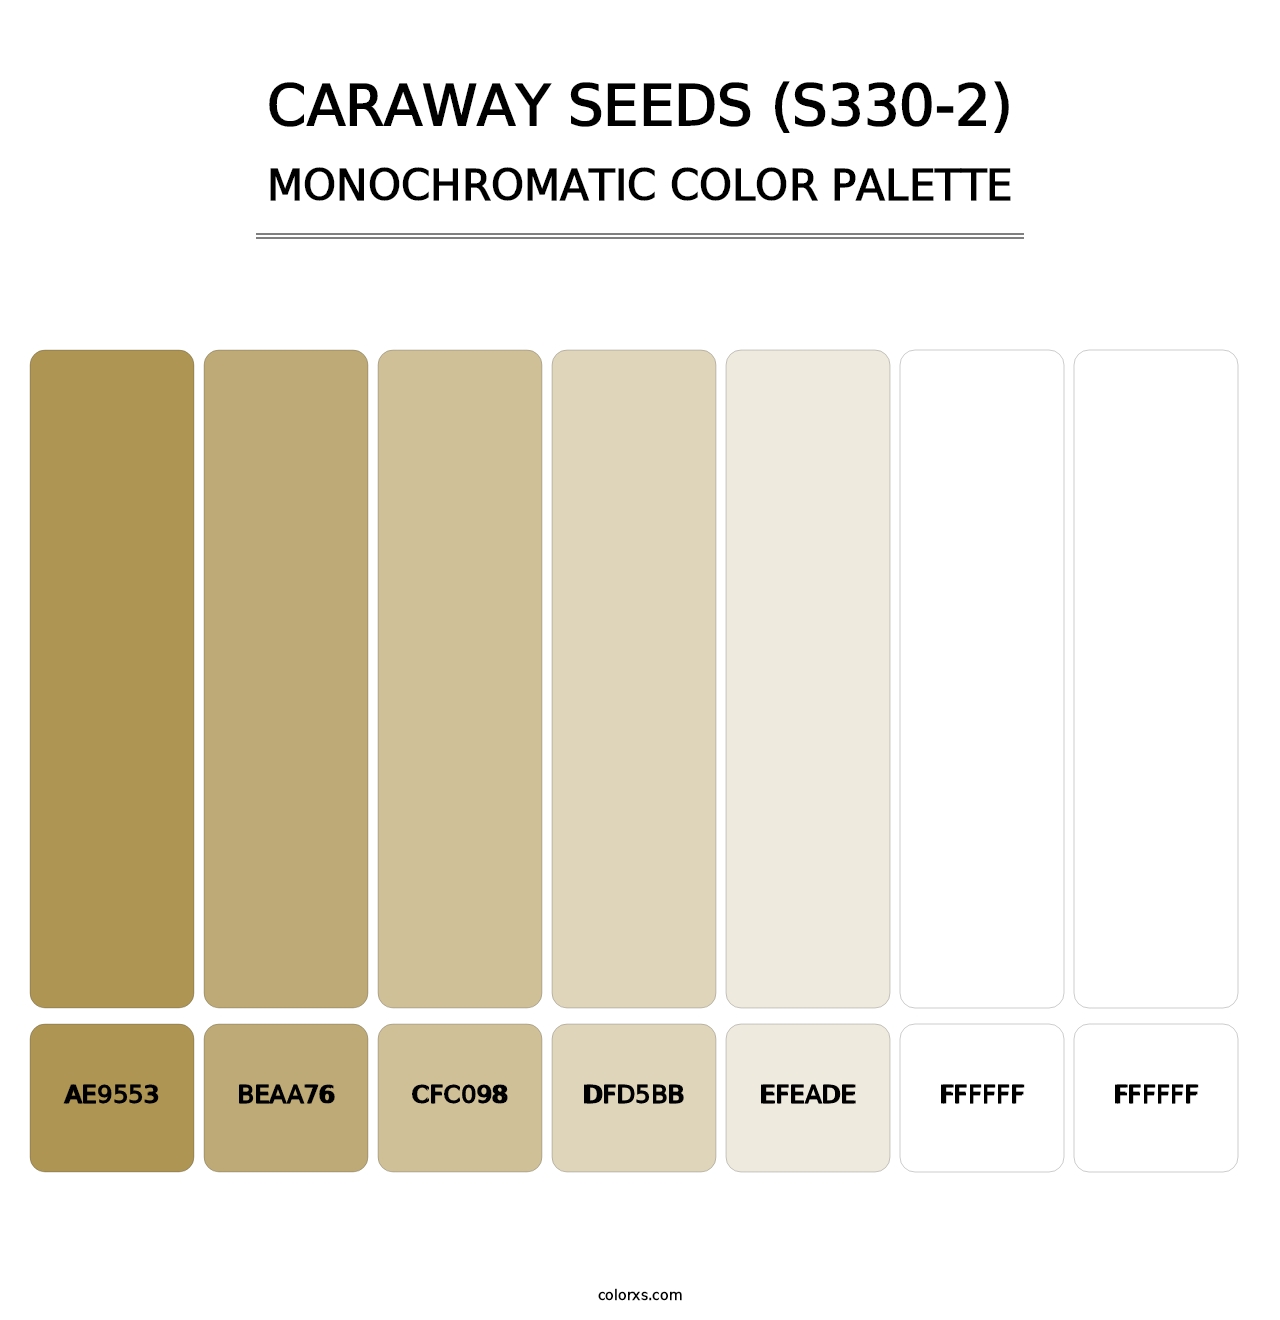 Caraway Seeds (S330-2) - Monochromatic Color Palette